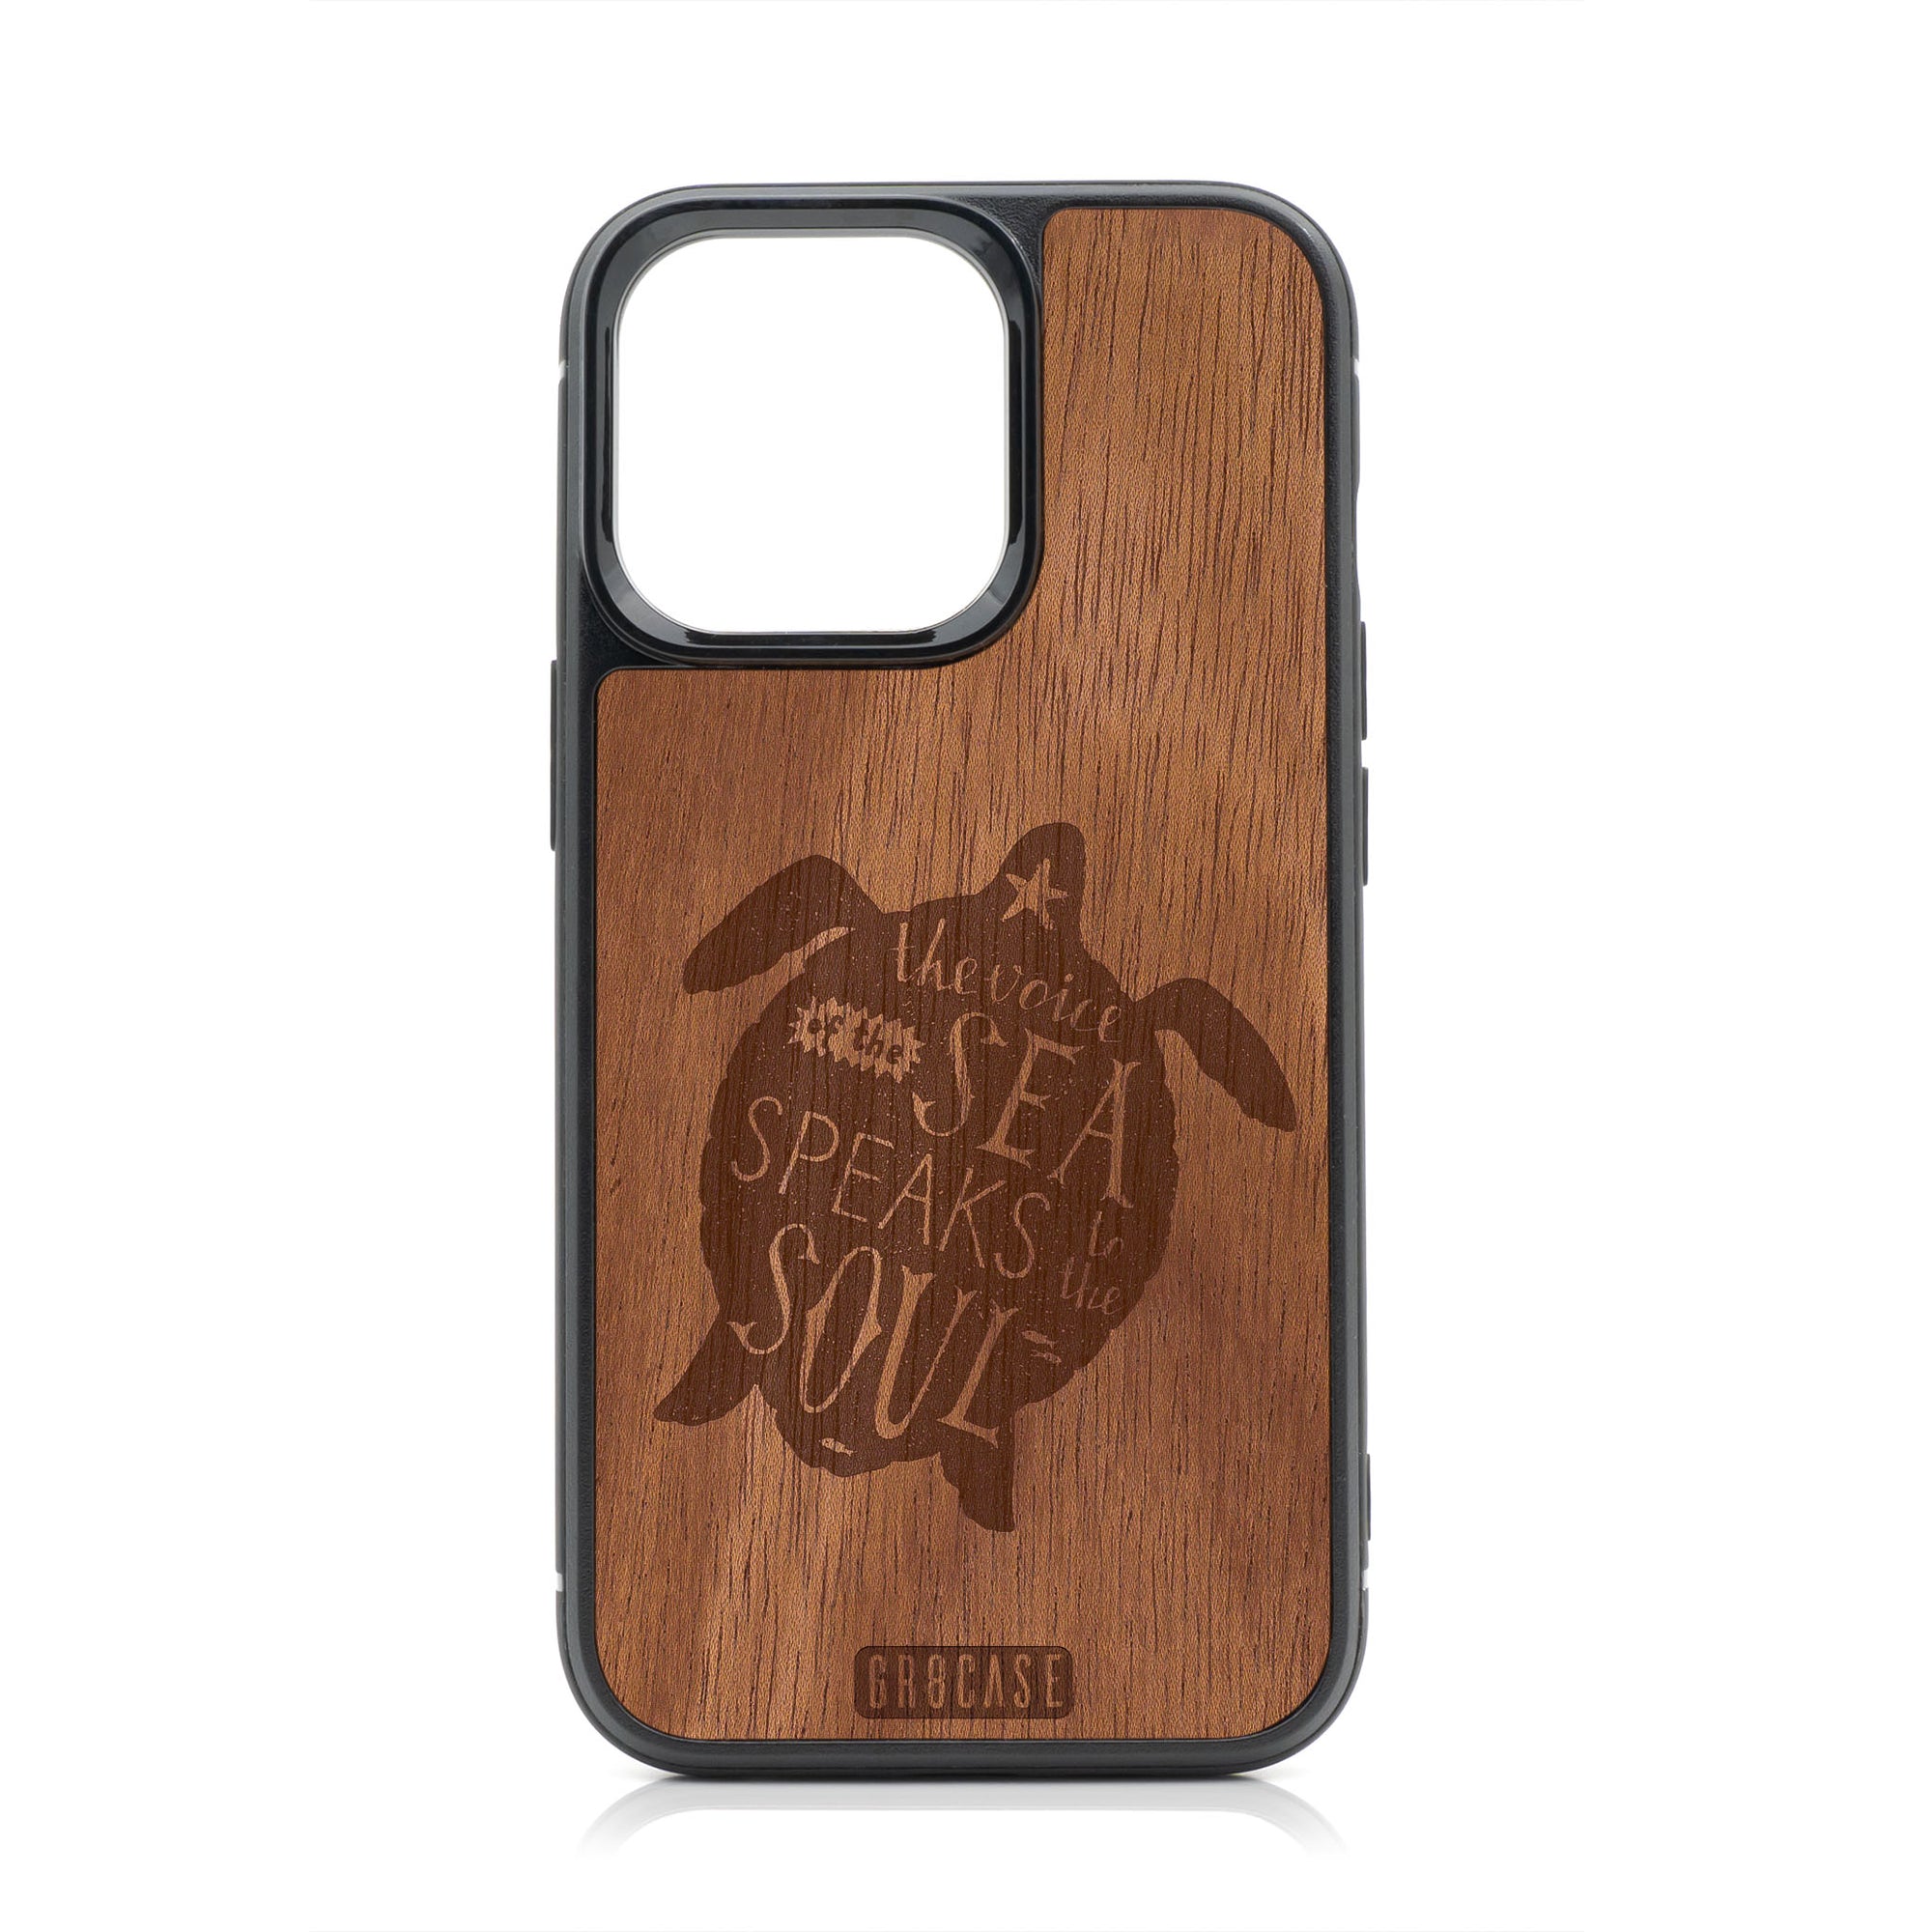 The Voice Of The Sea Speaks To The Soul (Turtle) Design Wood Case For iPhone 13 Pro